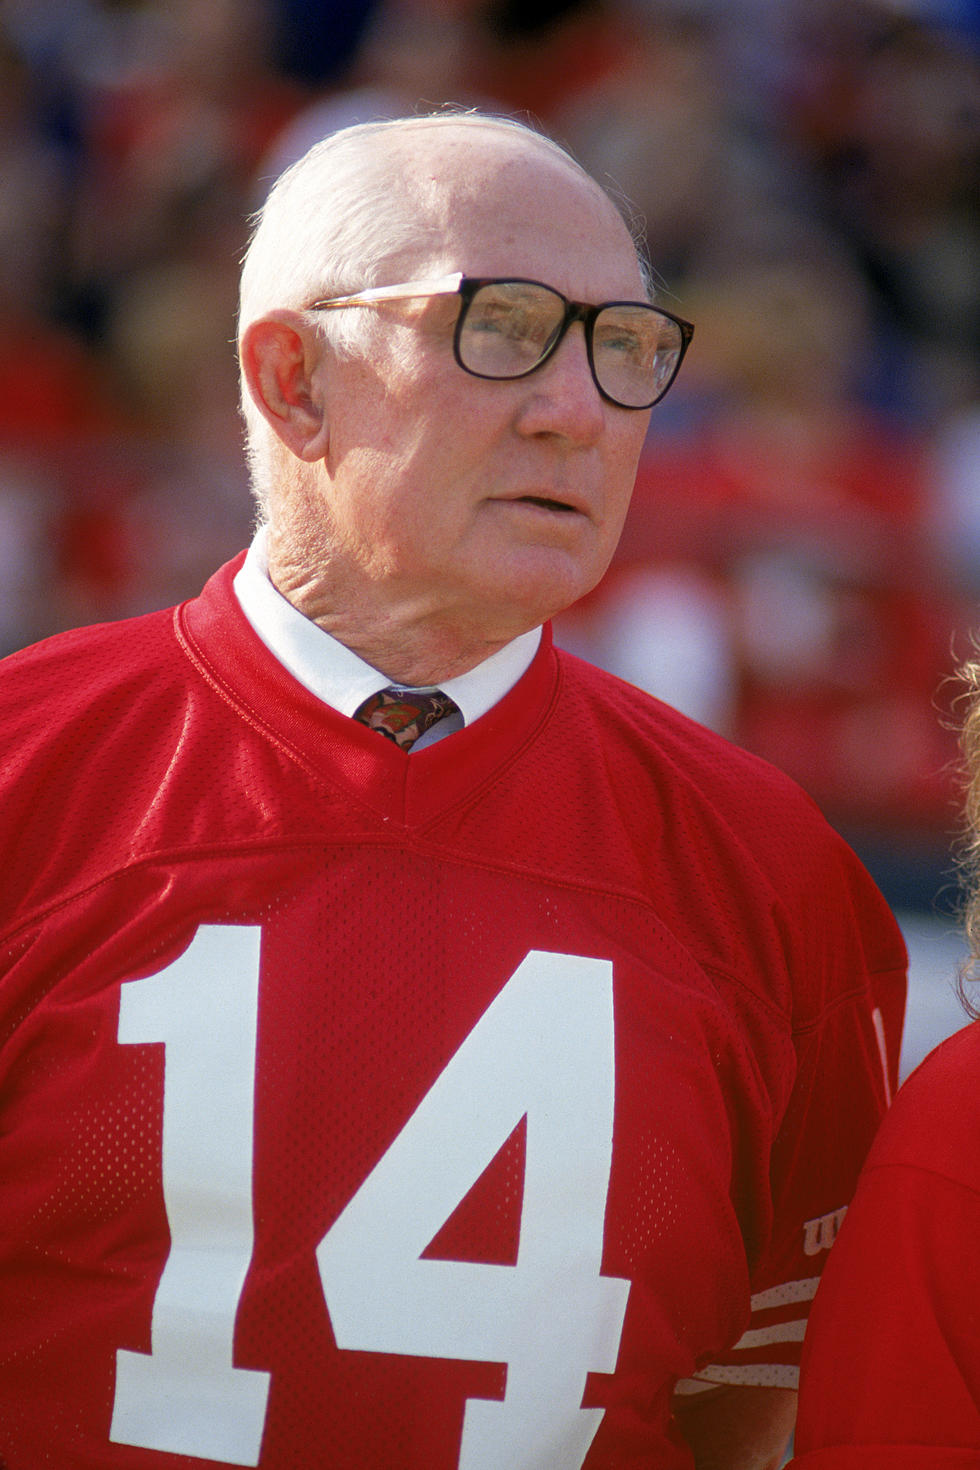 NFL Mourns the Loss of Hall of Famer Y.A. Tittle Dead at 90